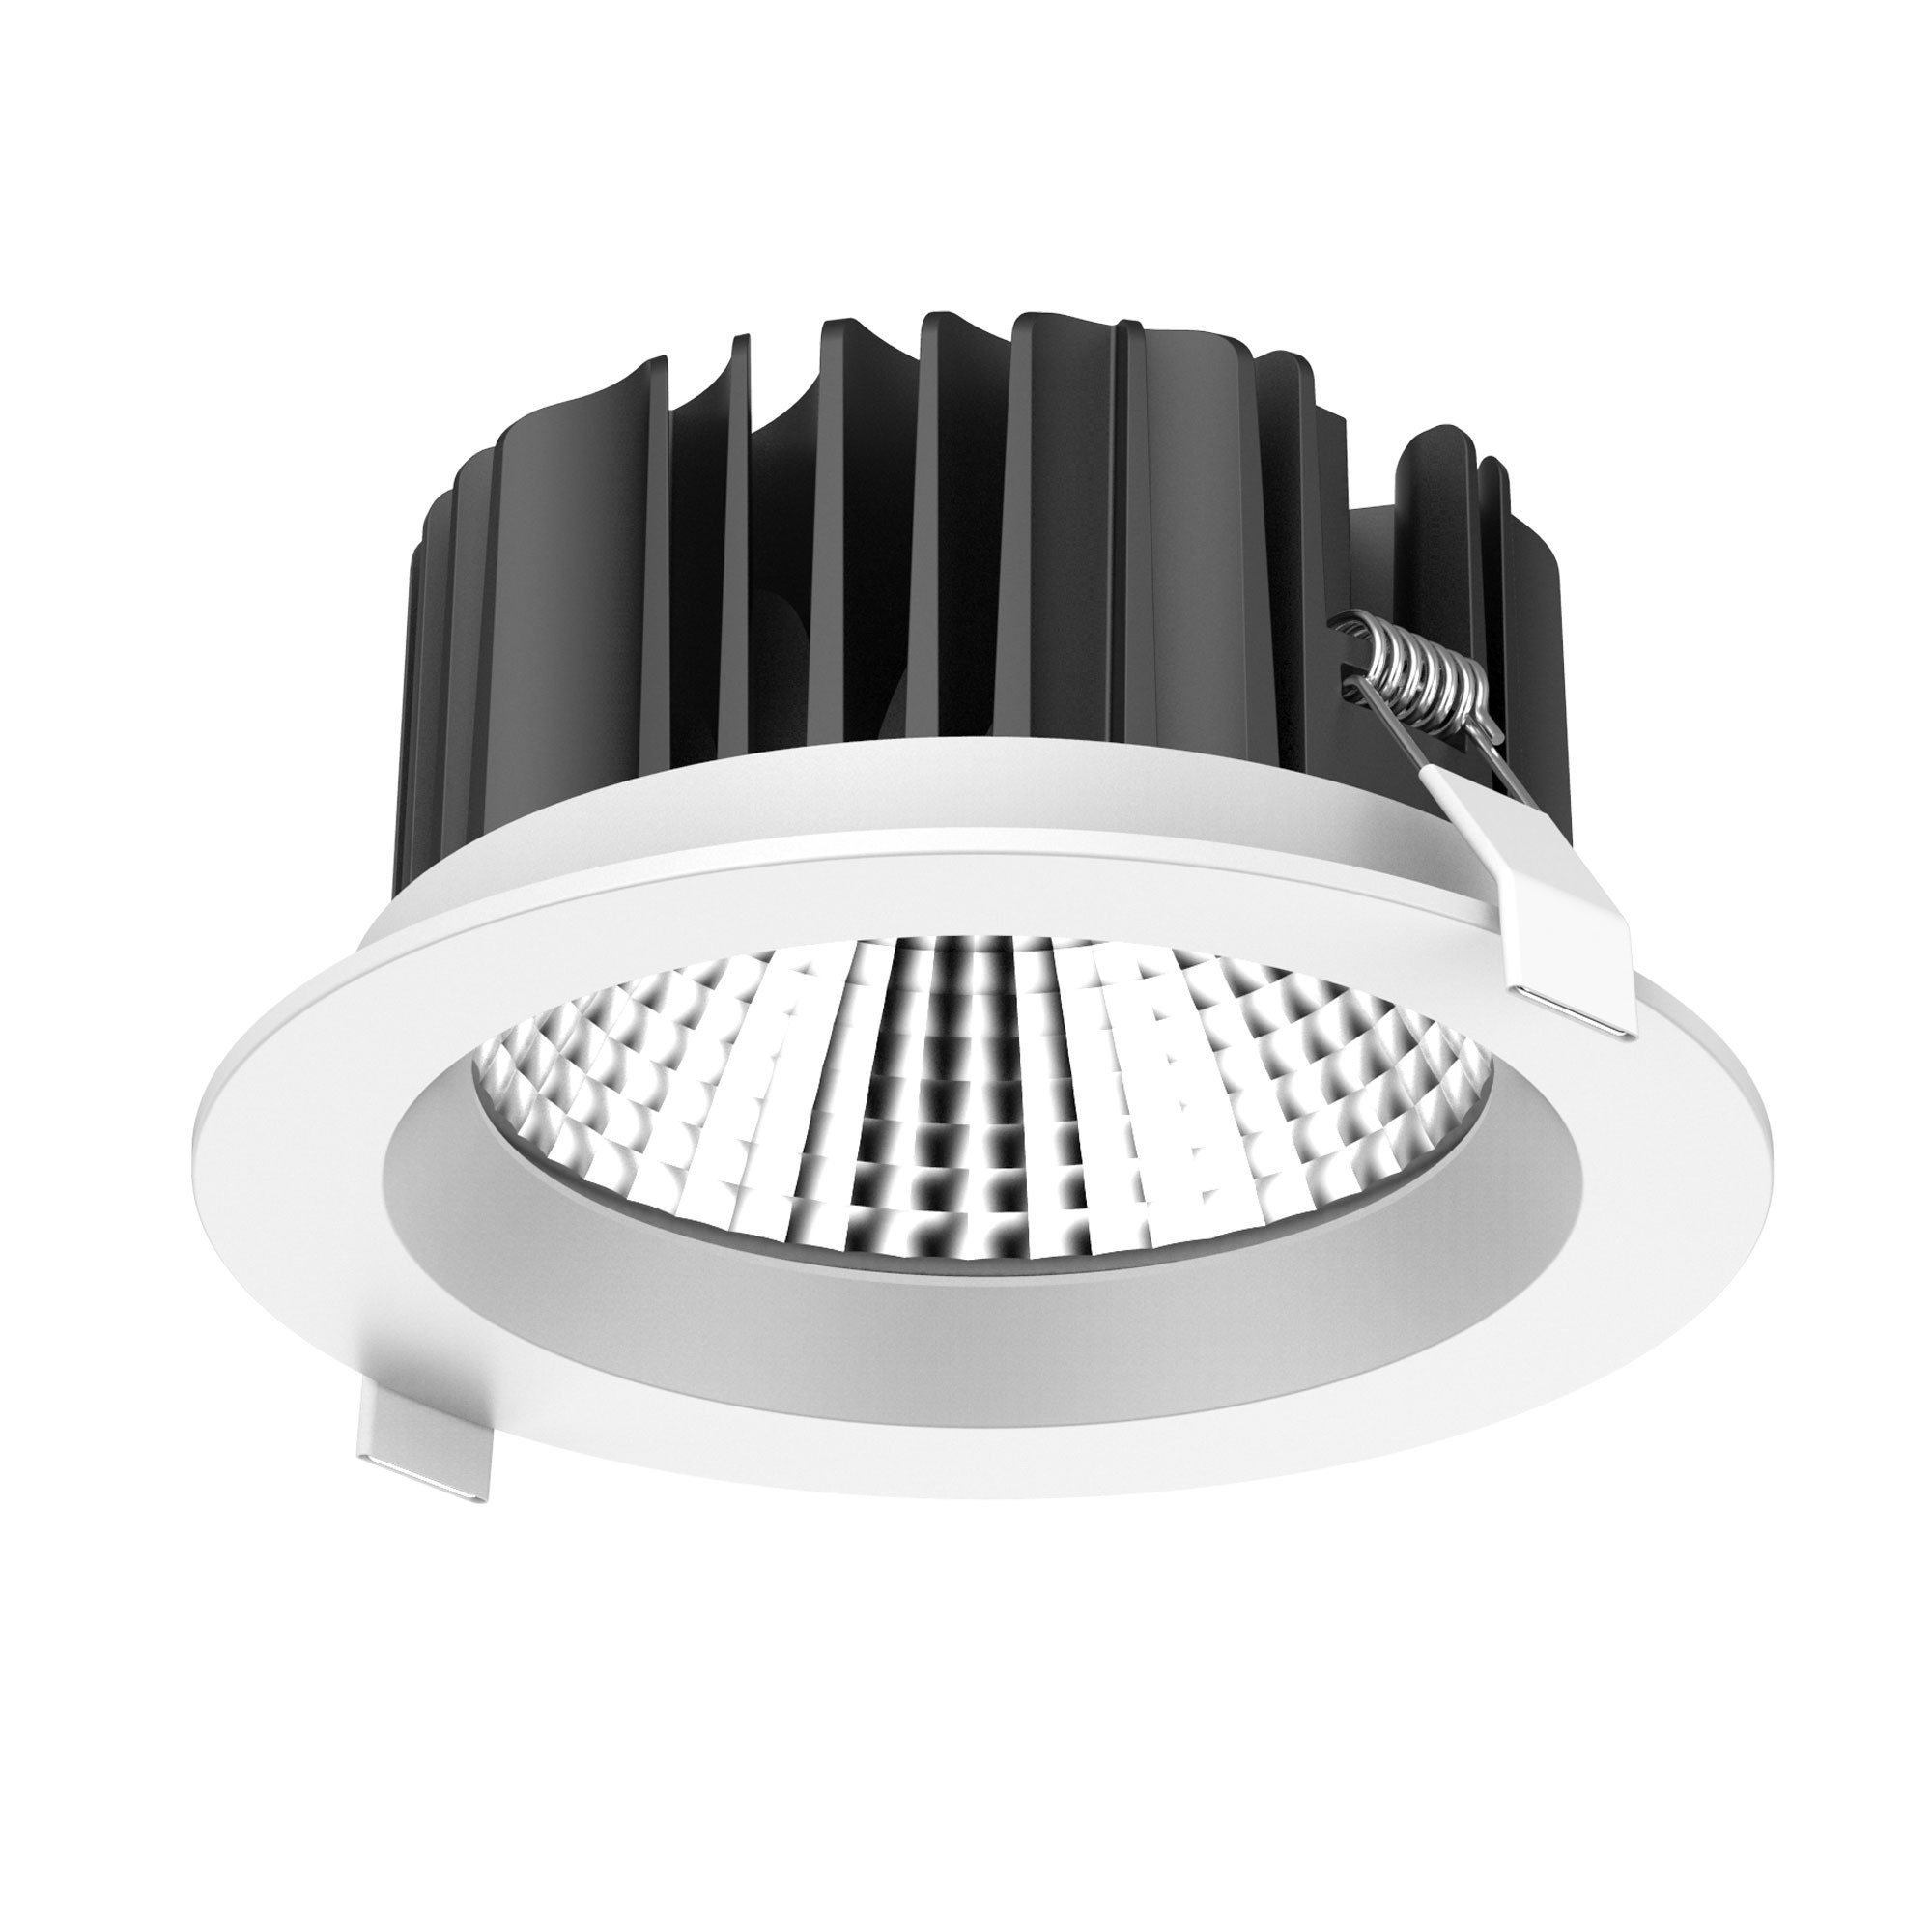 LED recessed downlight "Reflecto" - 13W 3000K IP54 Dimmable 230VAC